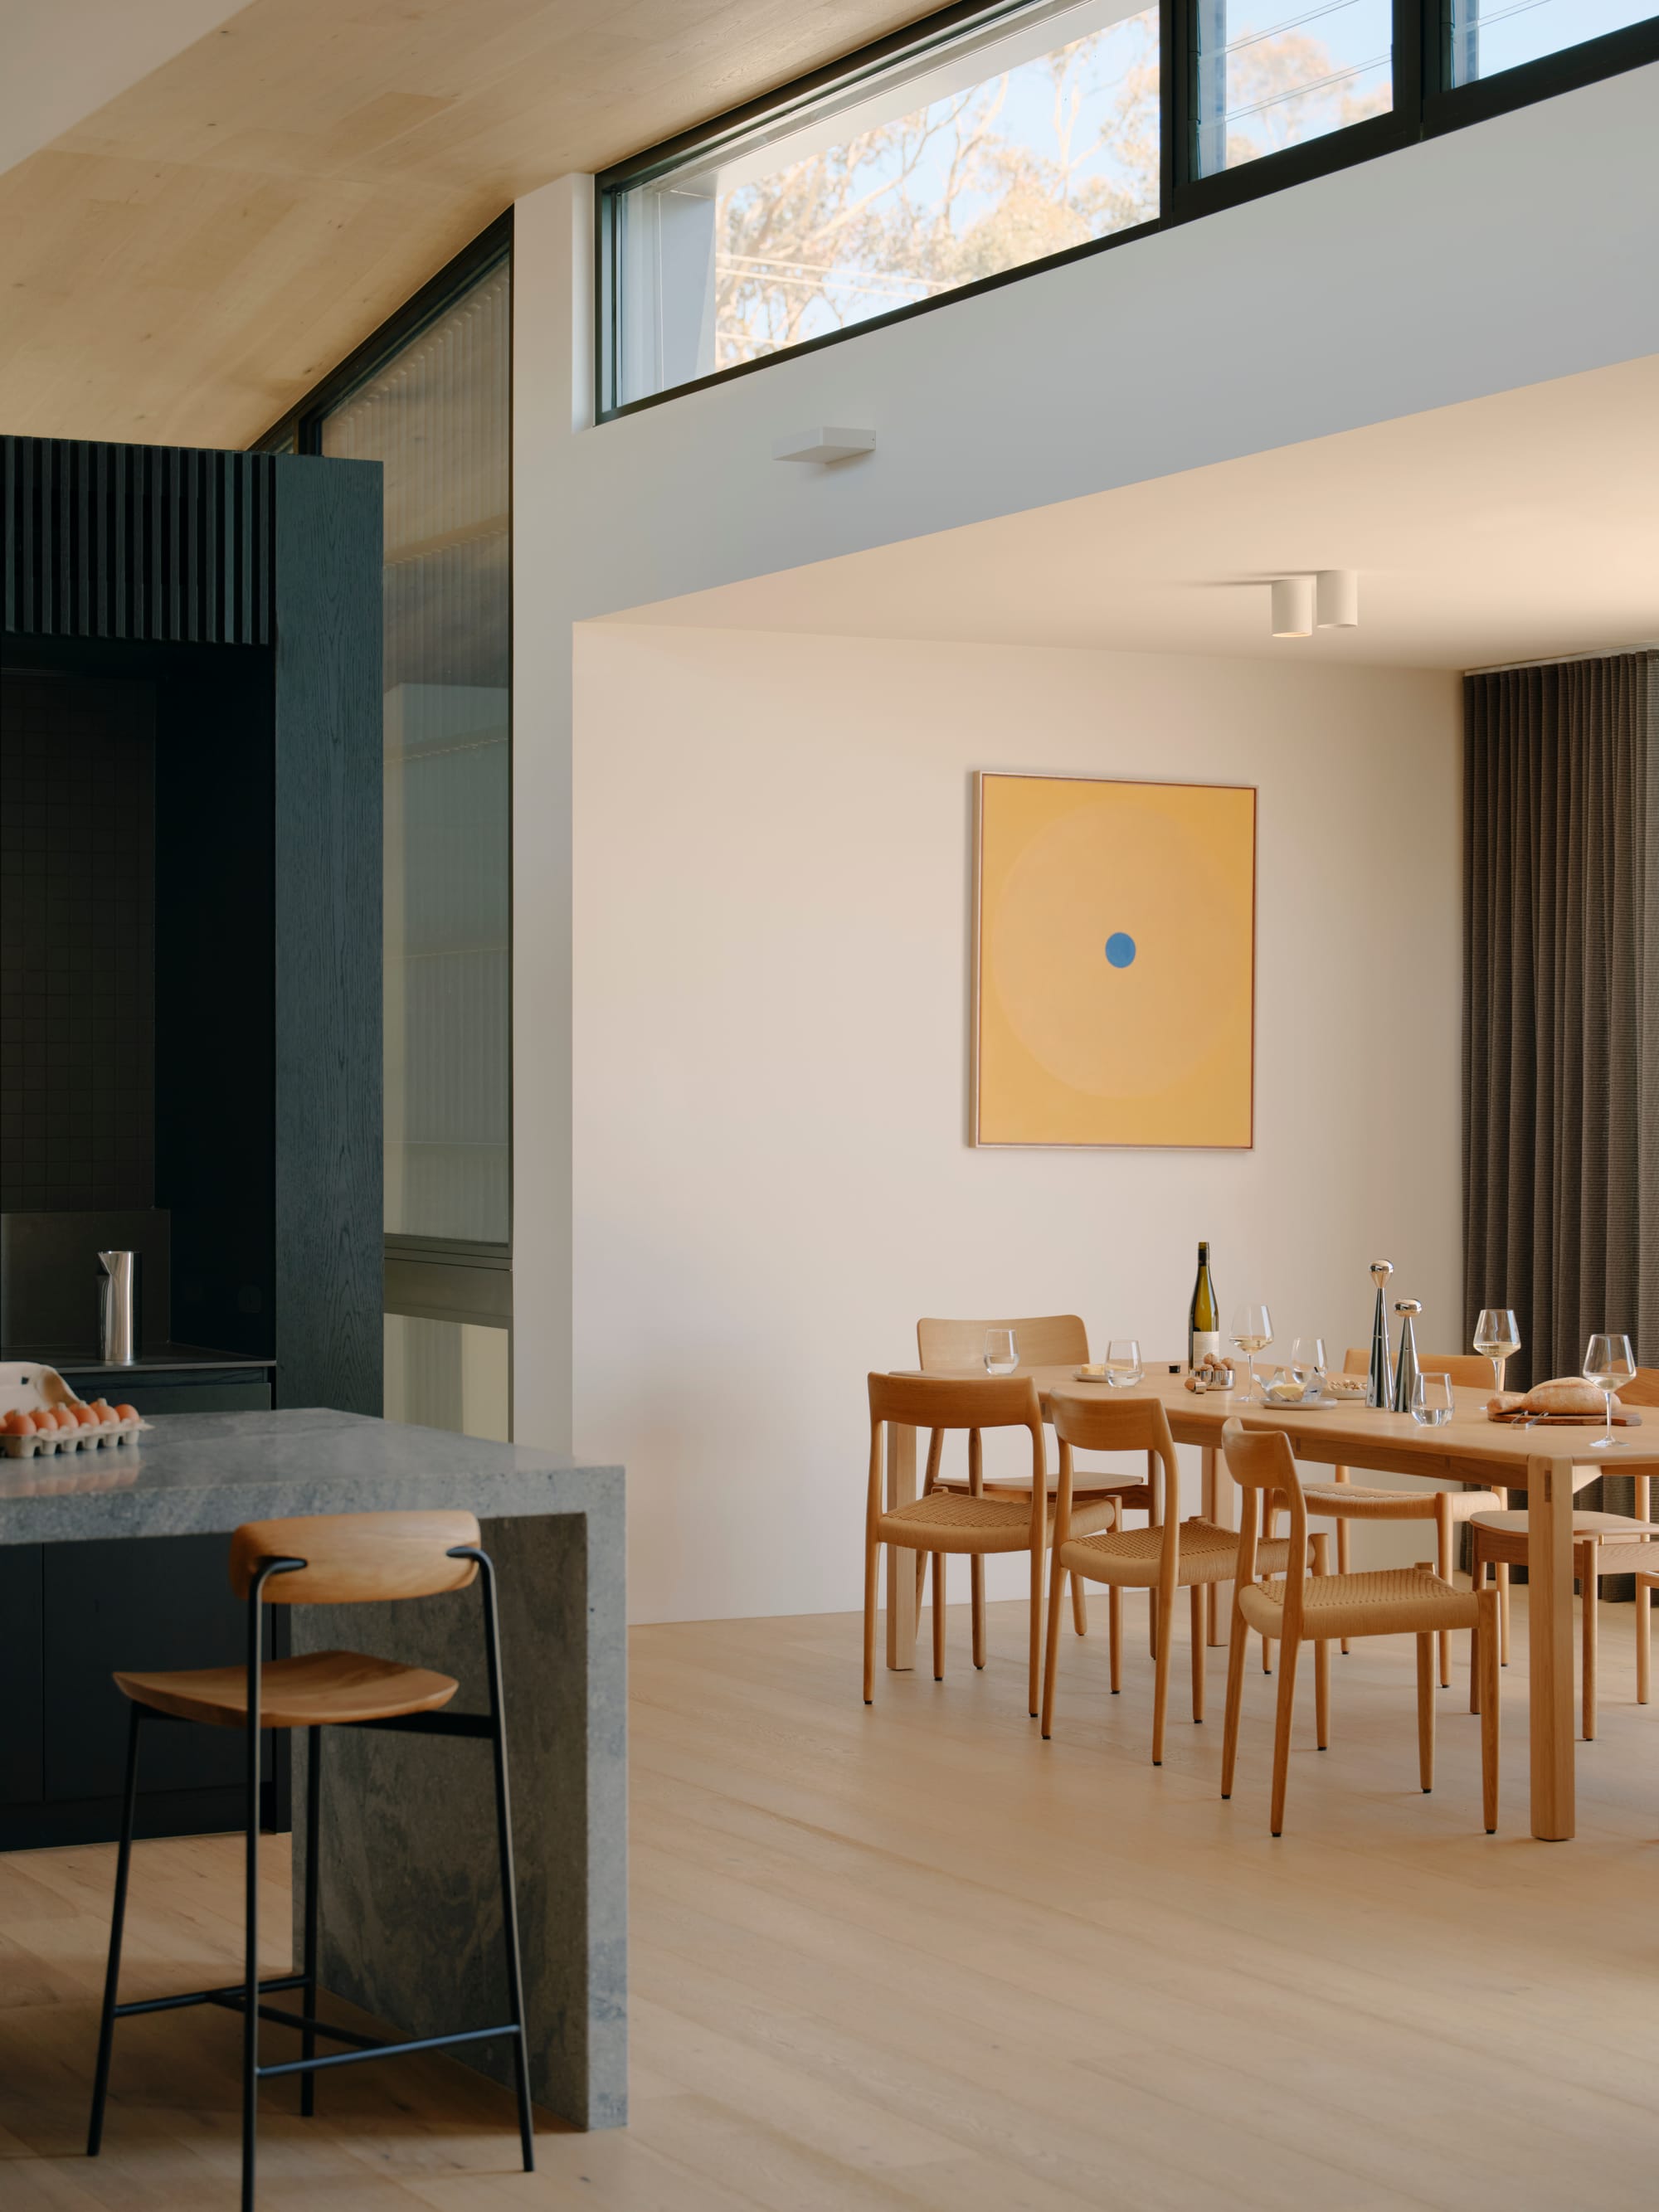 Courtside House by Tom Robertson Architects. Photography by Tom Ross. Kitchen and dining space with light timber floors, white walls and minimalistic timber chairs and stools. Granite waterfall benchtop to left of image. 